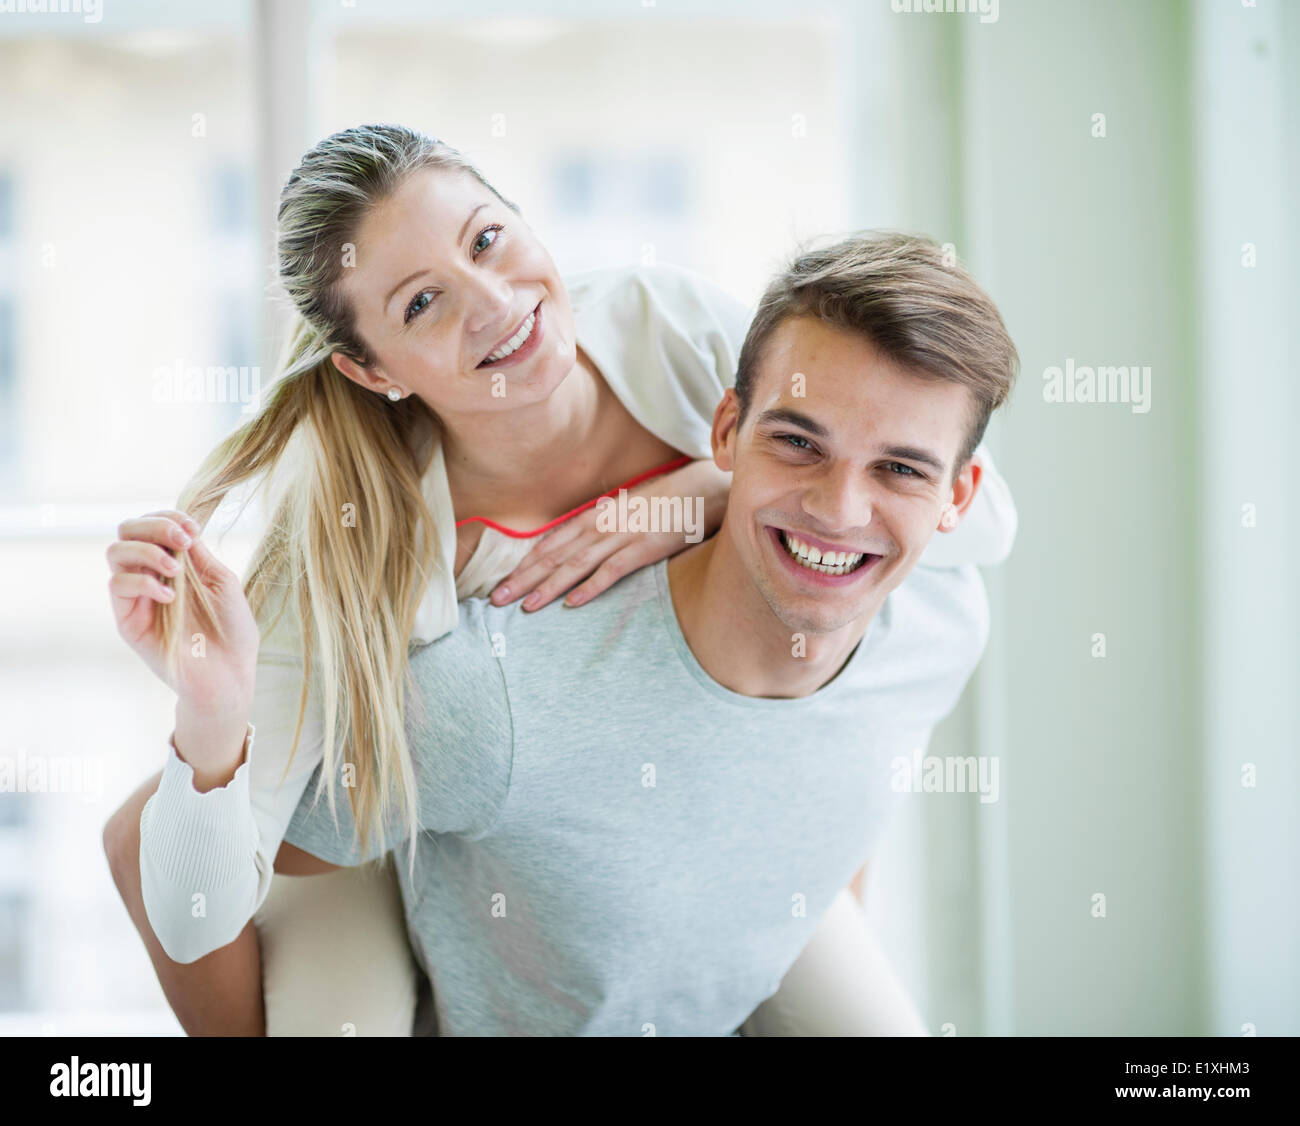 Portrait of happy young man giving piggyback ride to woman at home Banque D'Images